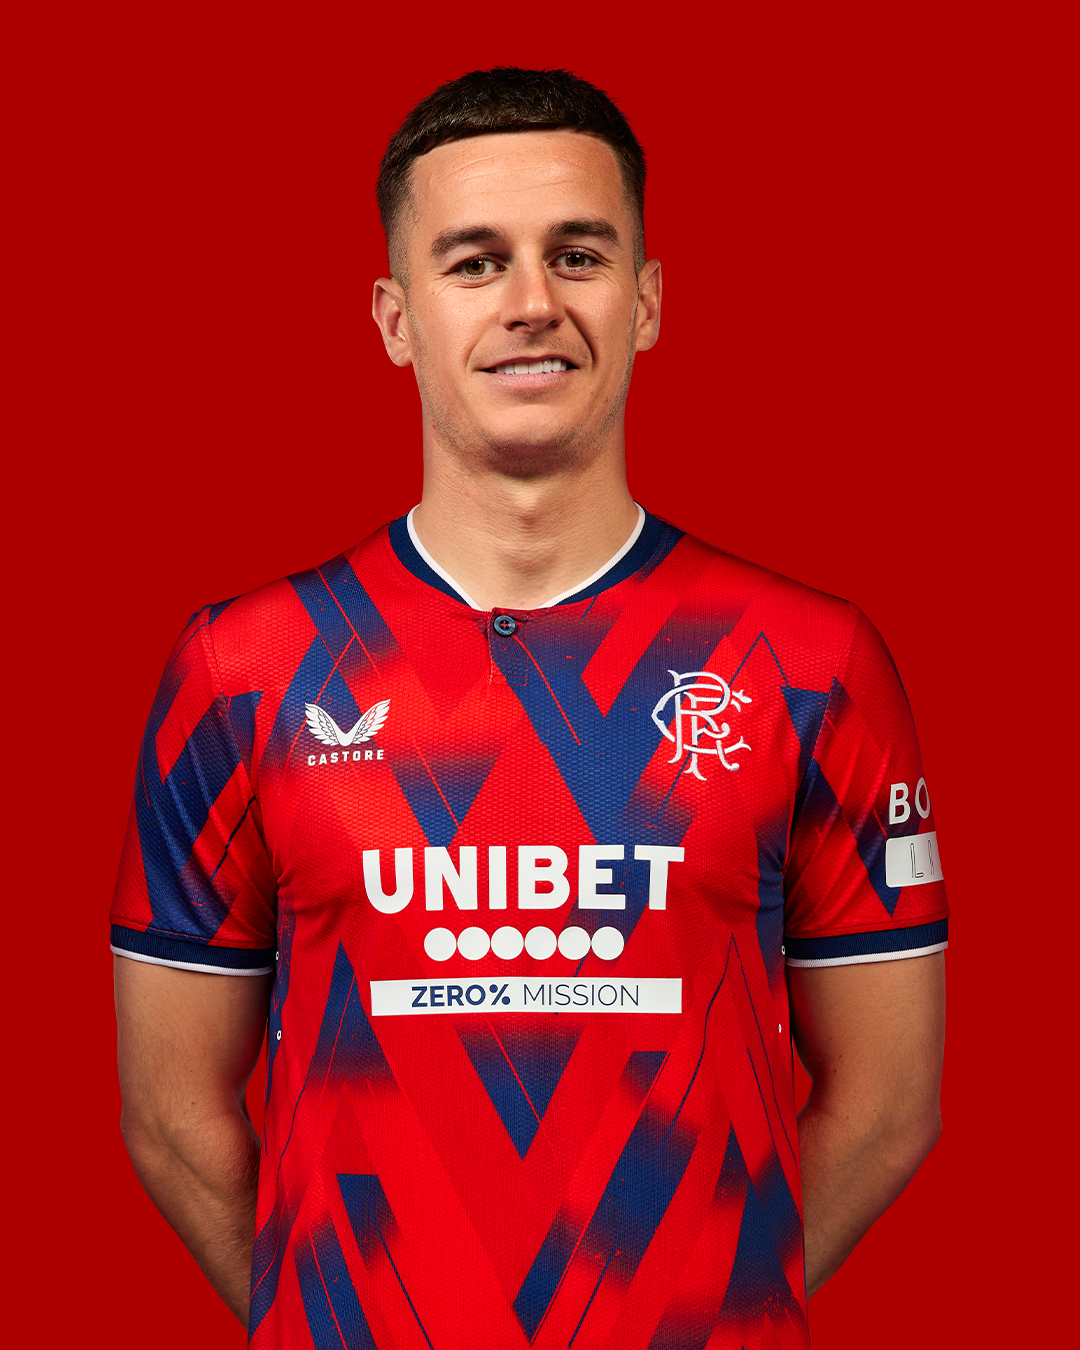 Best Rangers FC merch 2023: Where can I buy it and how much does it cost?